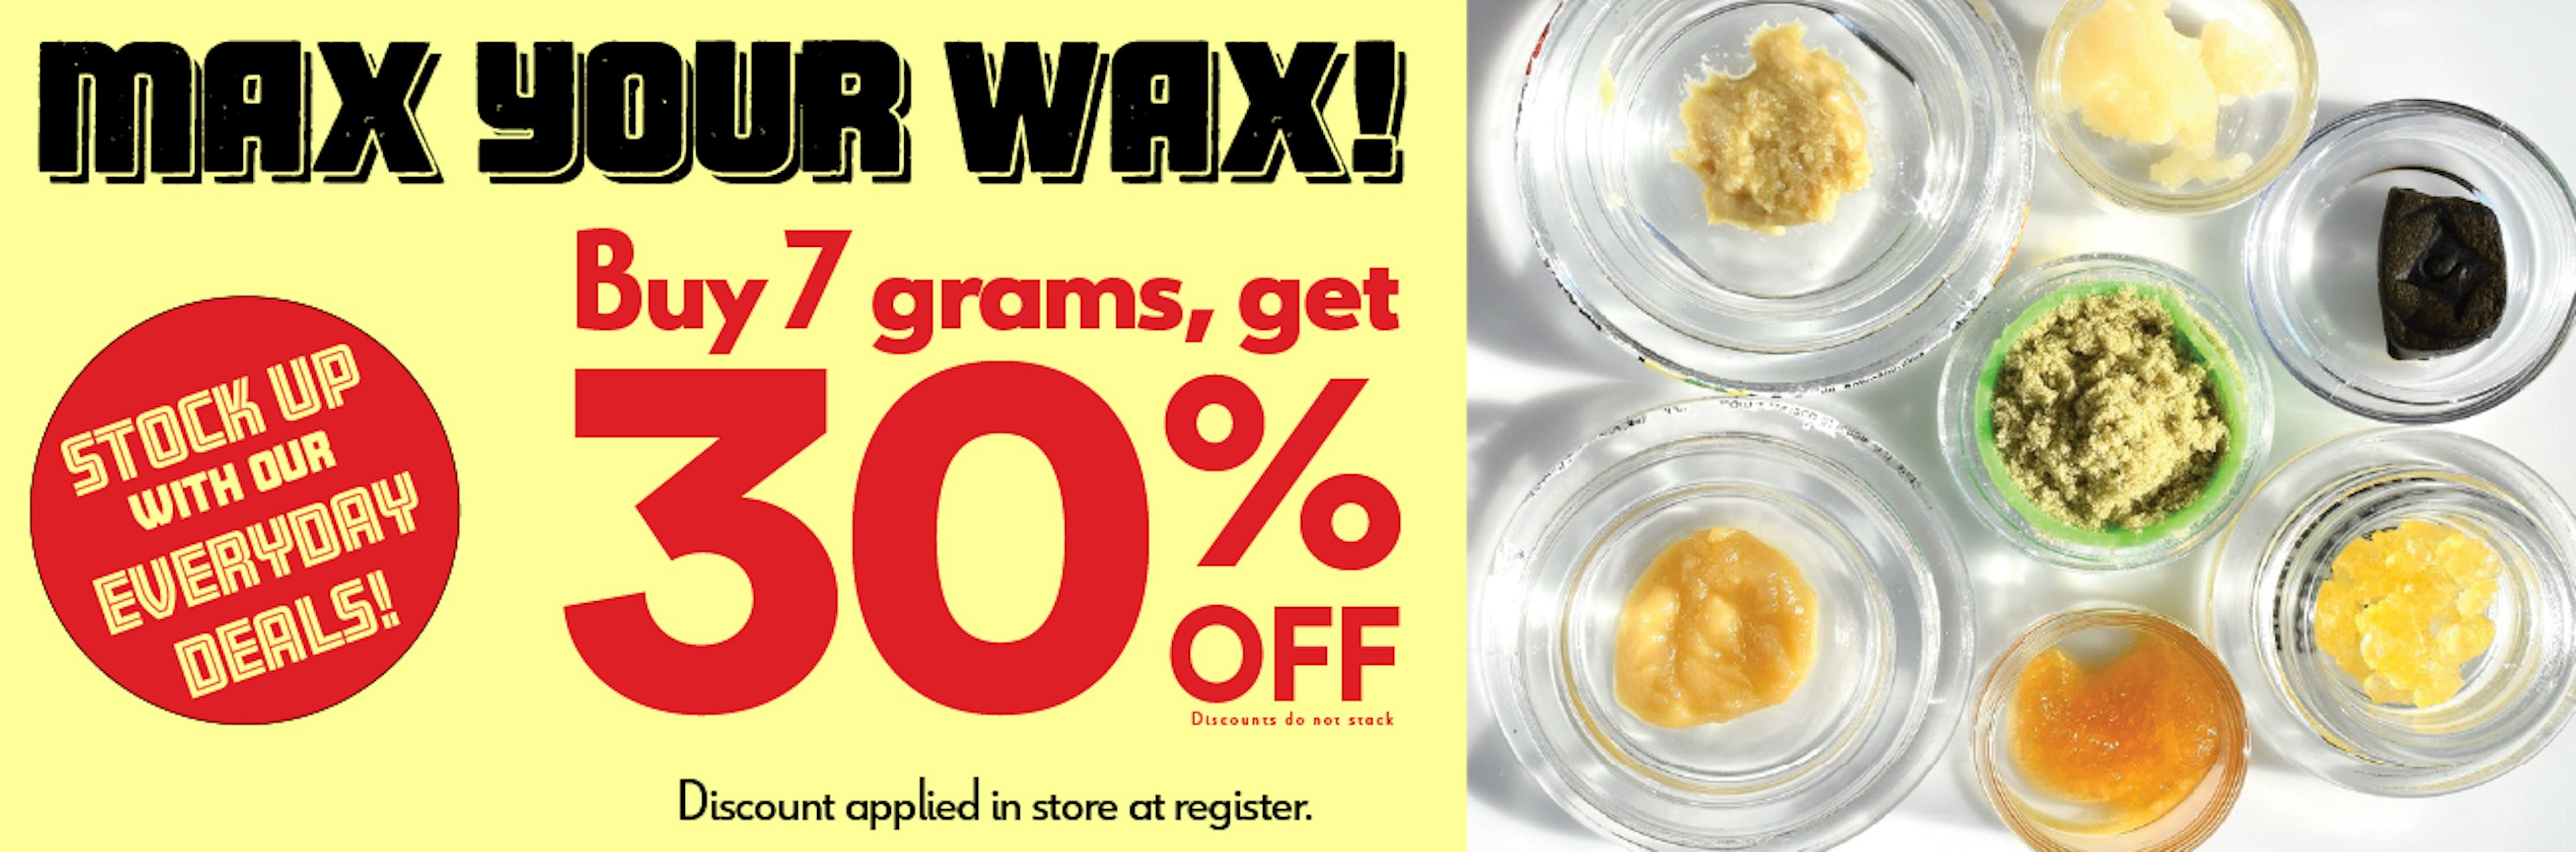 Buy 7 grams of wax, and get 30% off in store!